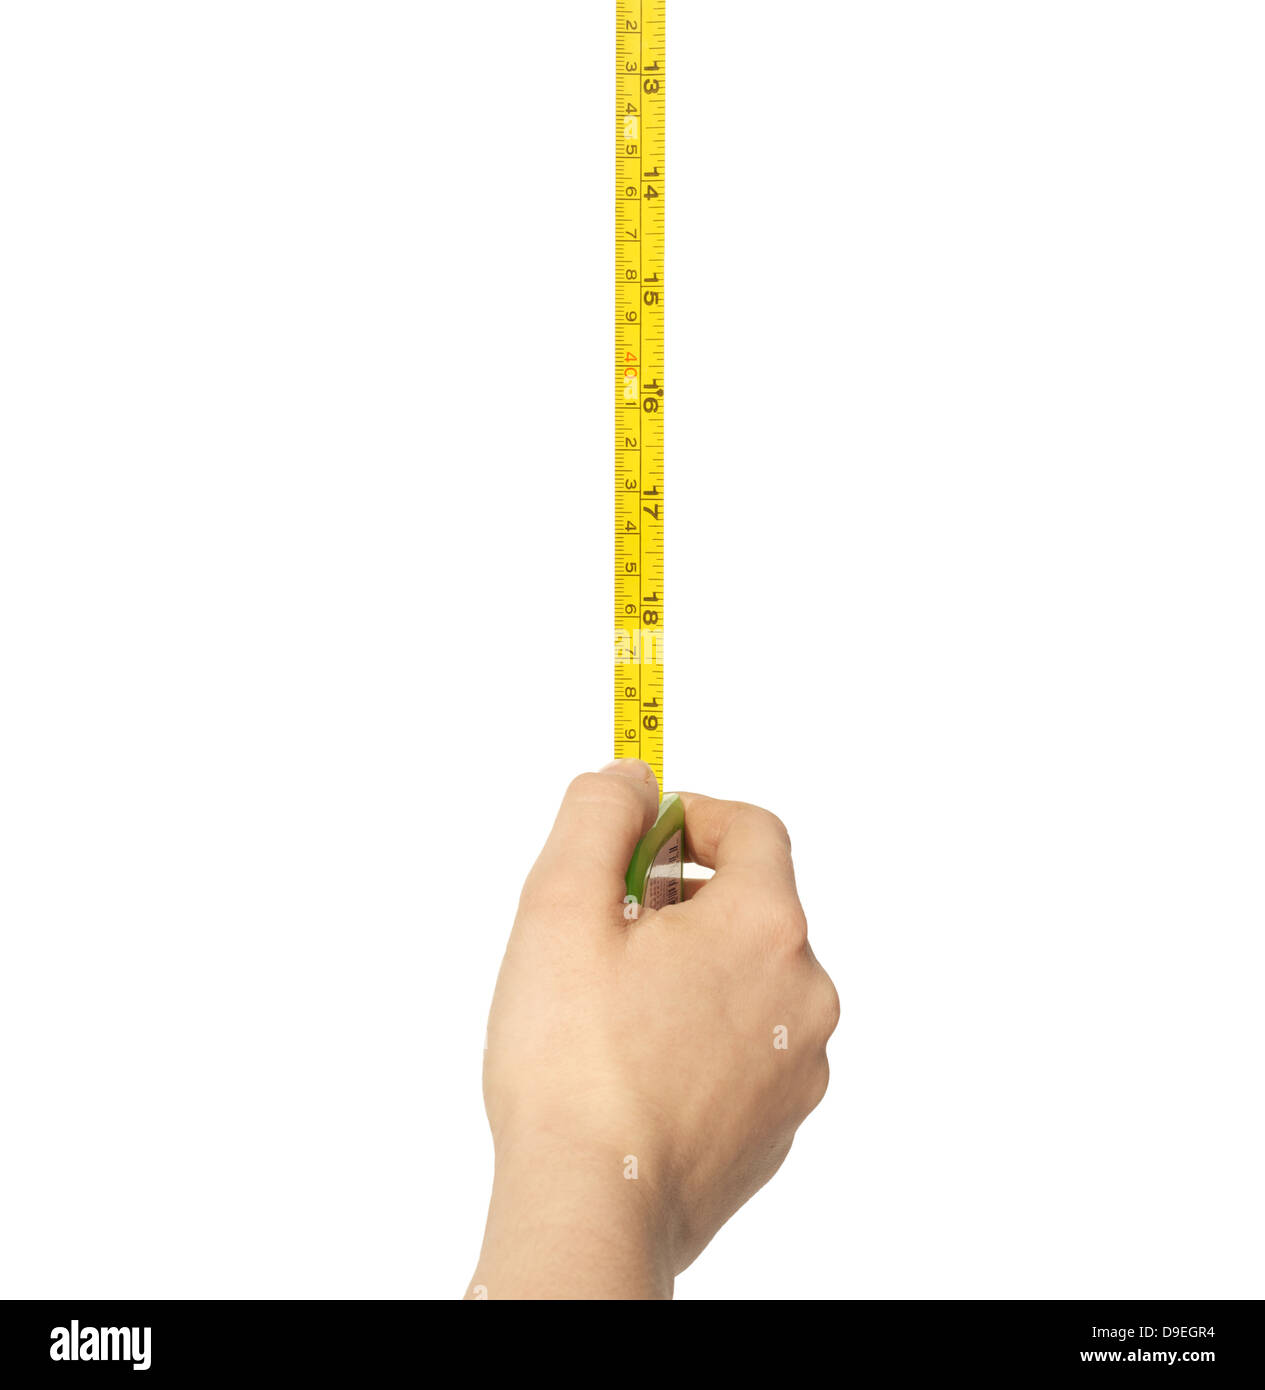 446,769 Measuring Tape Images, Stock Photos, 3D objects, & Vectors